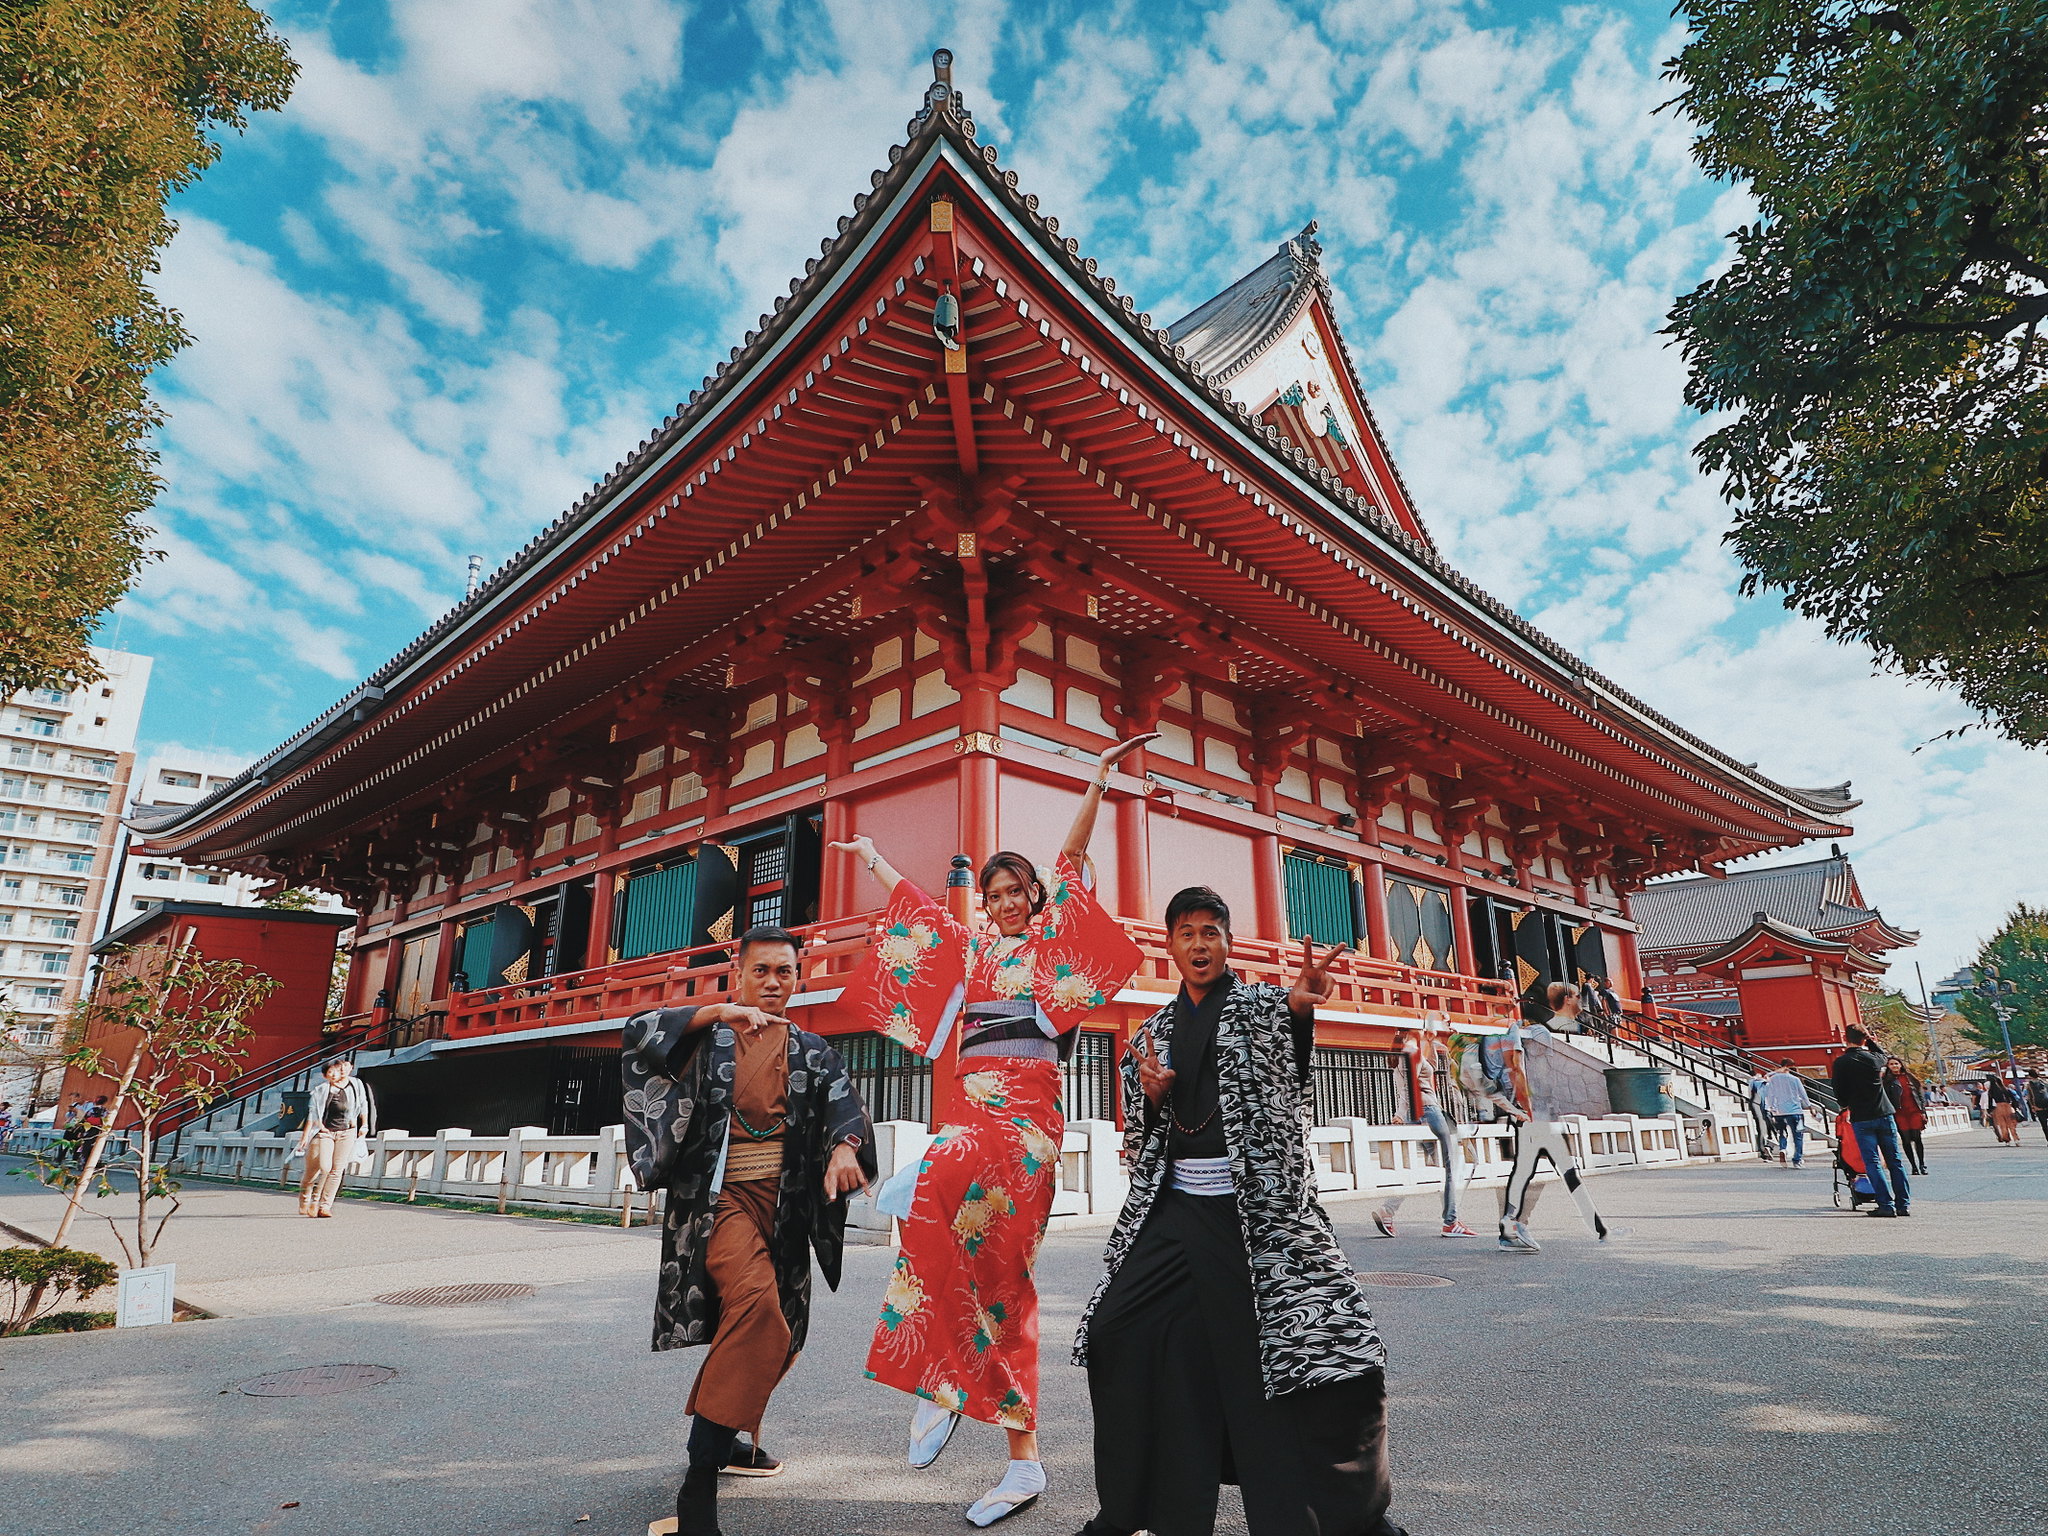  tokyo travel guide 2019  